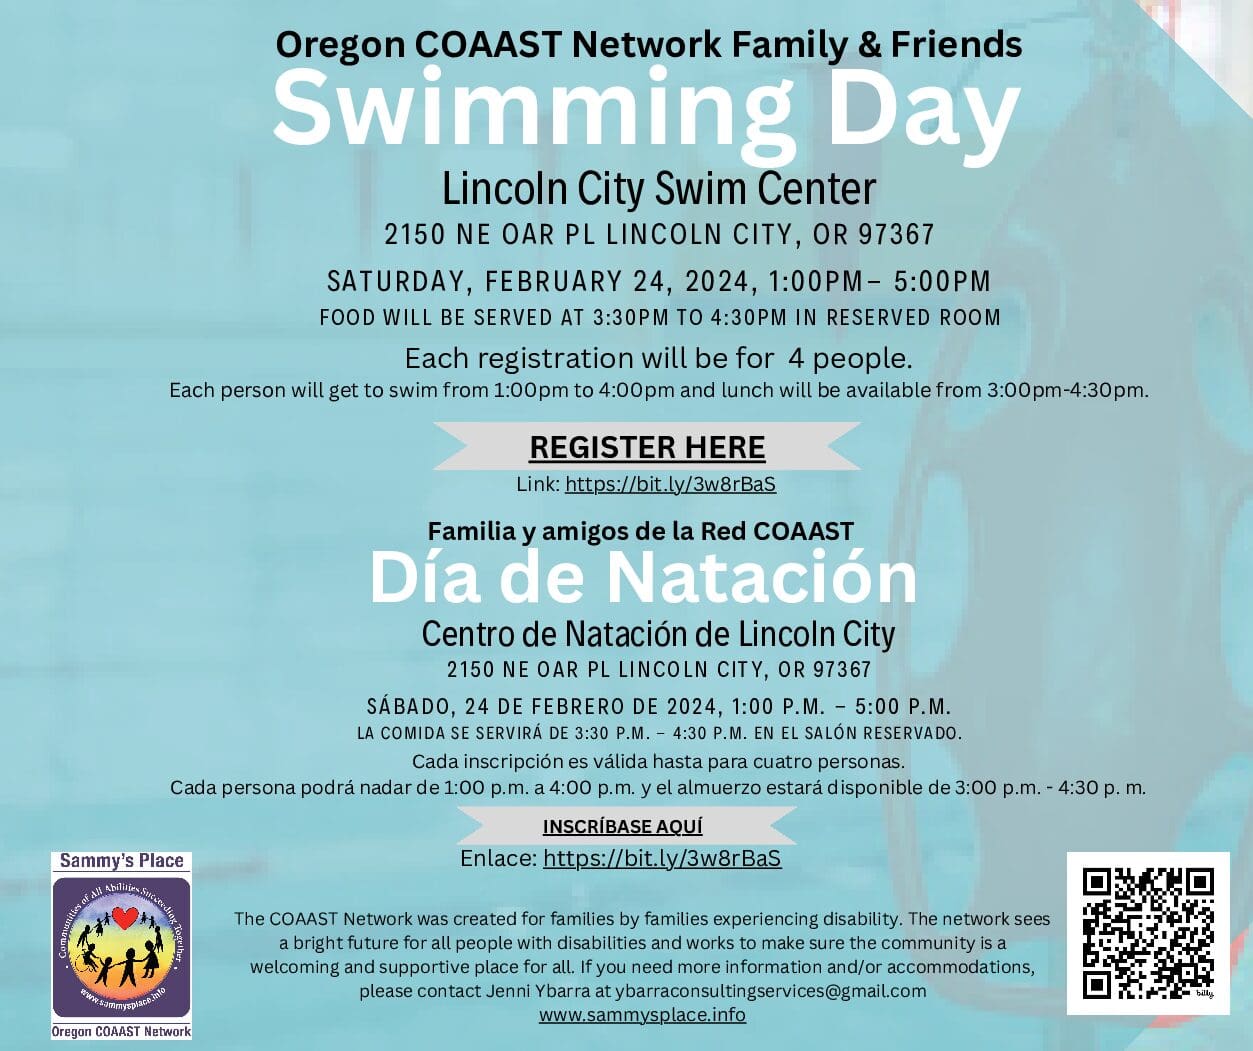 Lincoln County- Lincoln City Swimming Day FREE 2/24